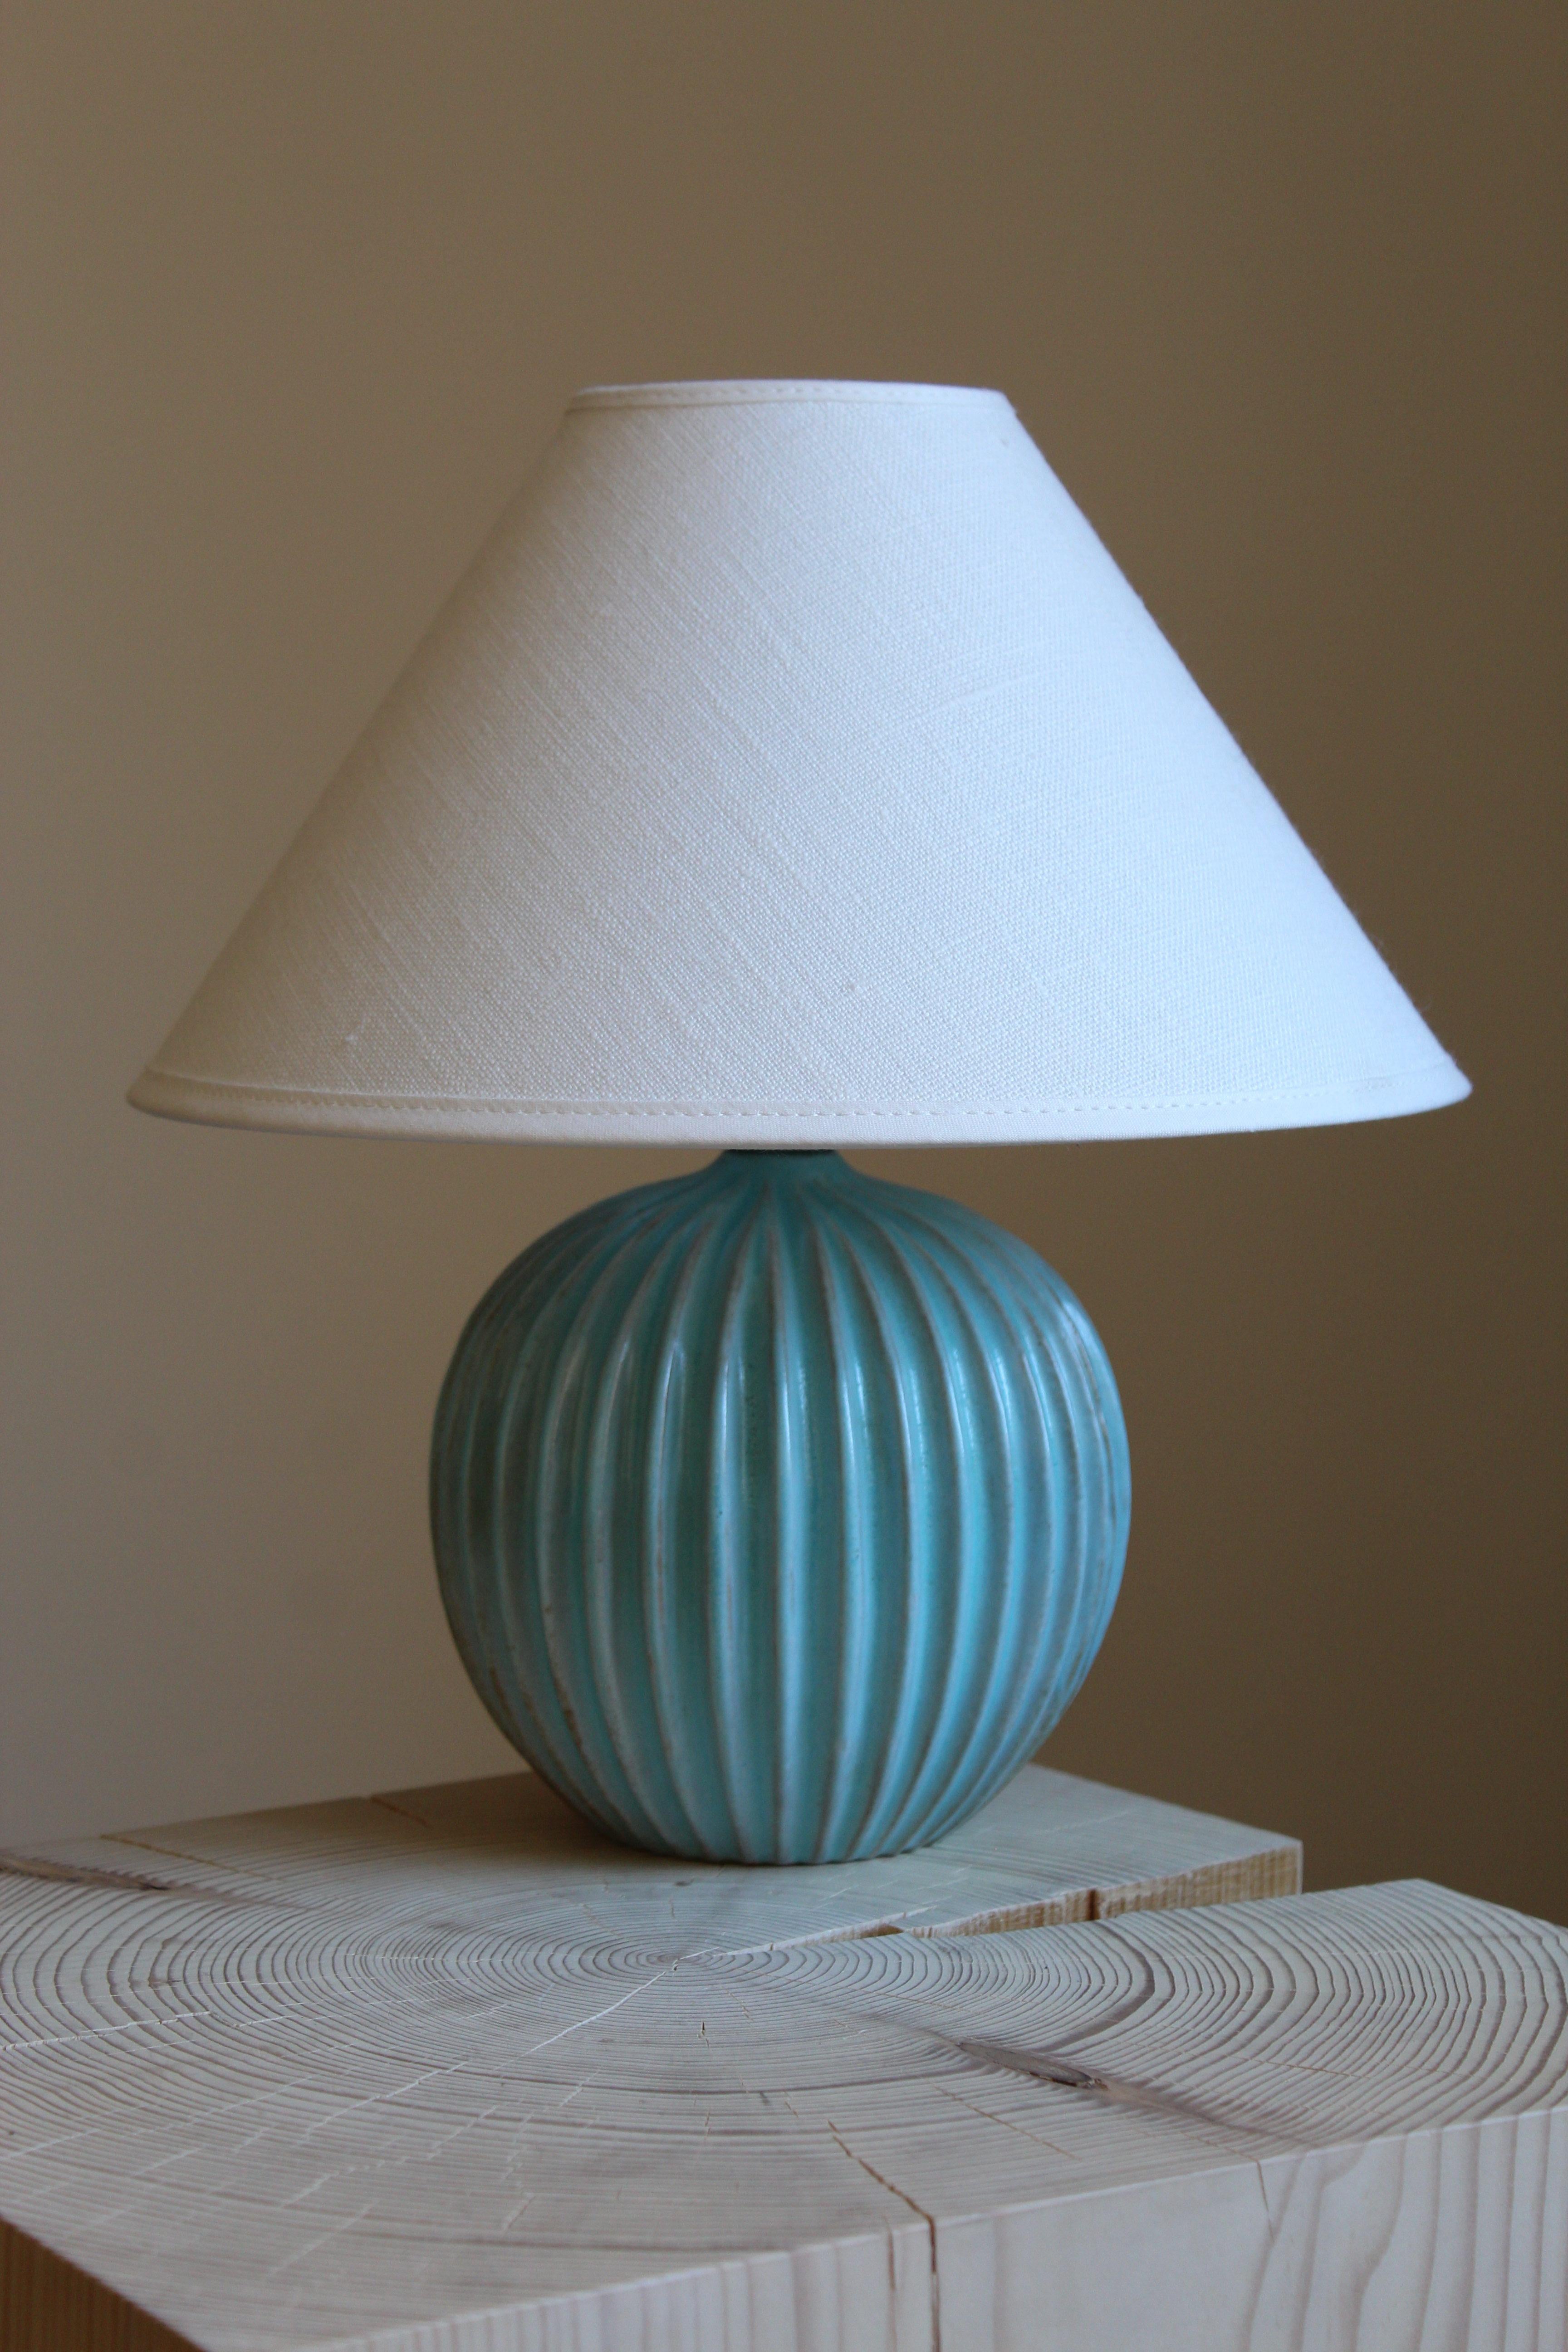 A table lamp produced by Christian Schollert. In blue-glazed stoneware. Produced in Denmark, 1960s. Signed. Sold without lampshade.